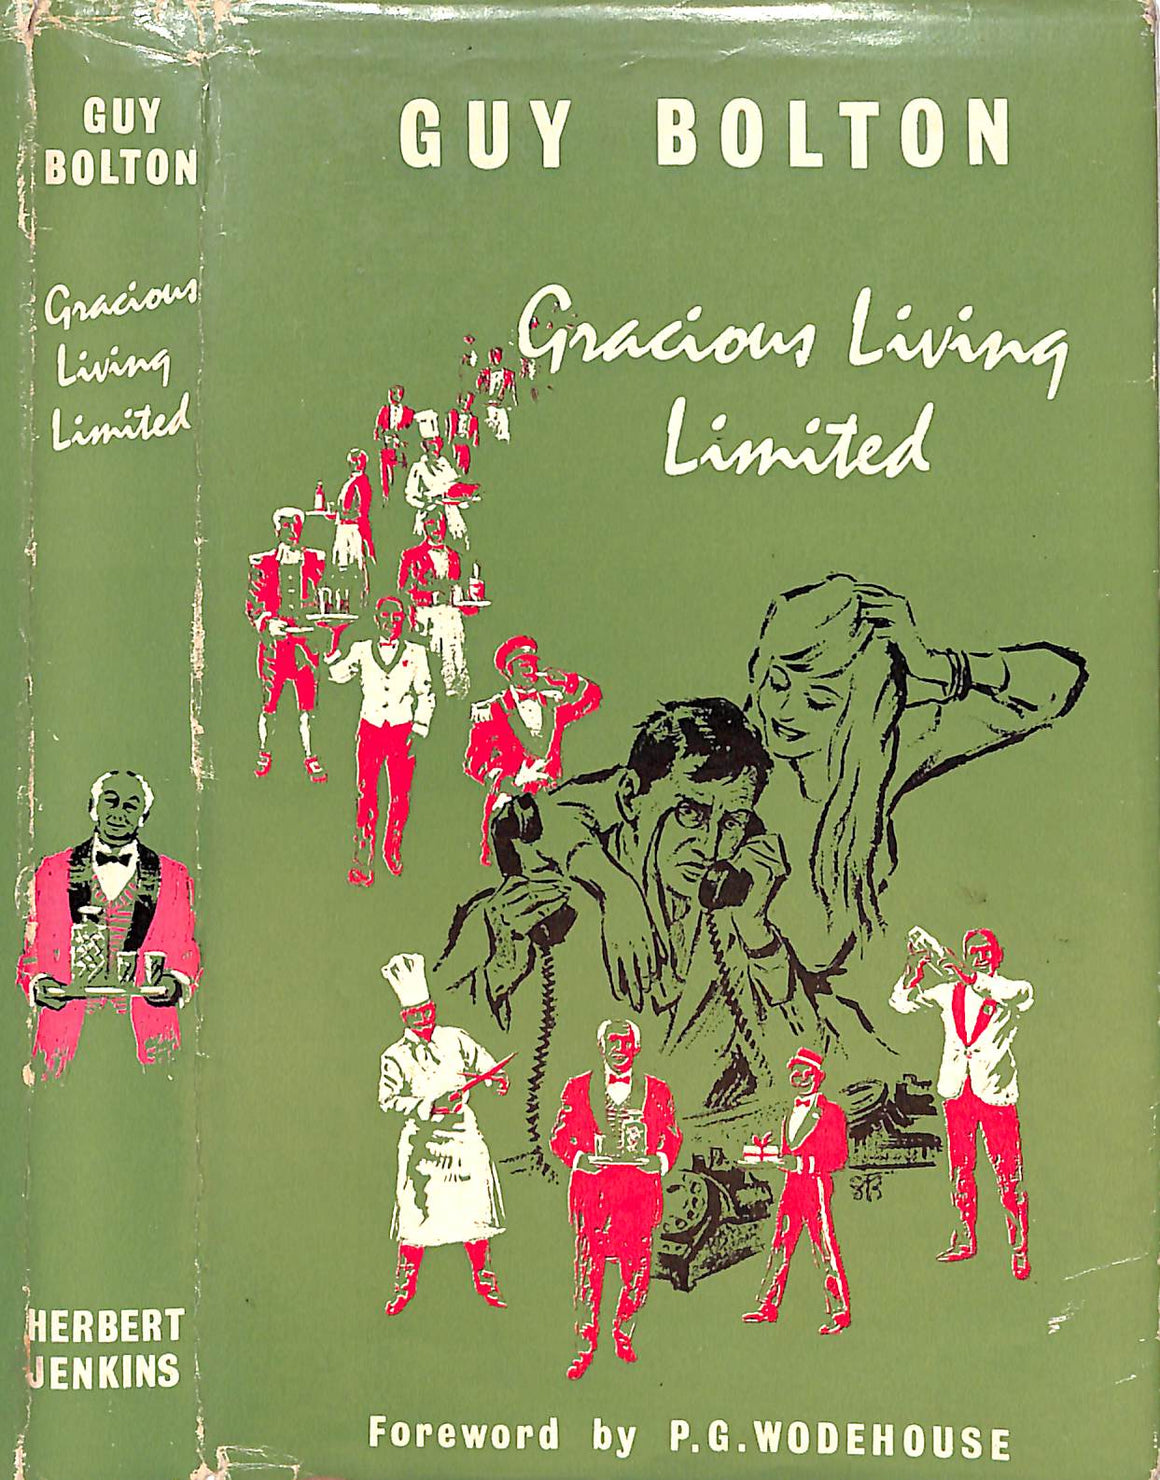 "Gracious Living, Limited" 1966 BOLTON, Guy